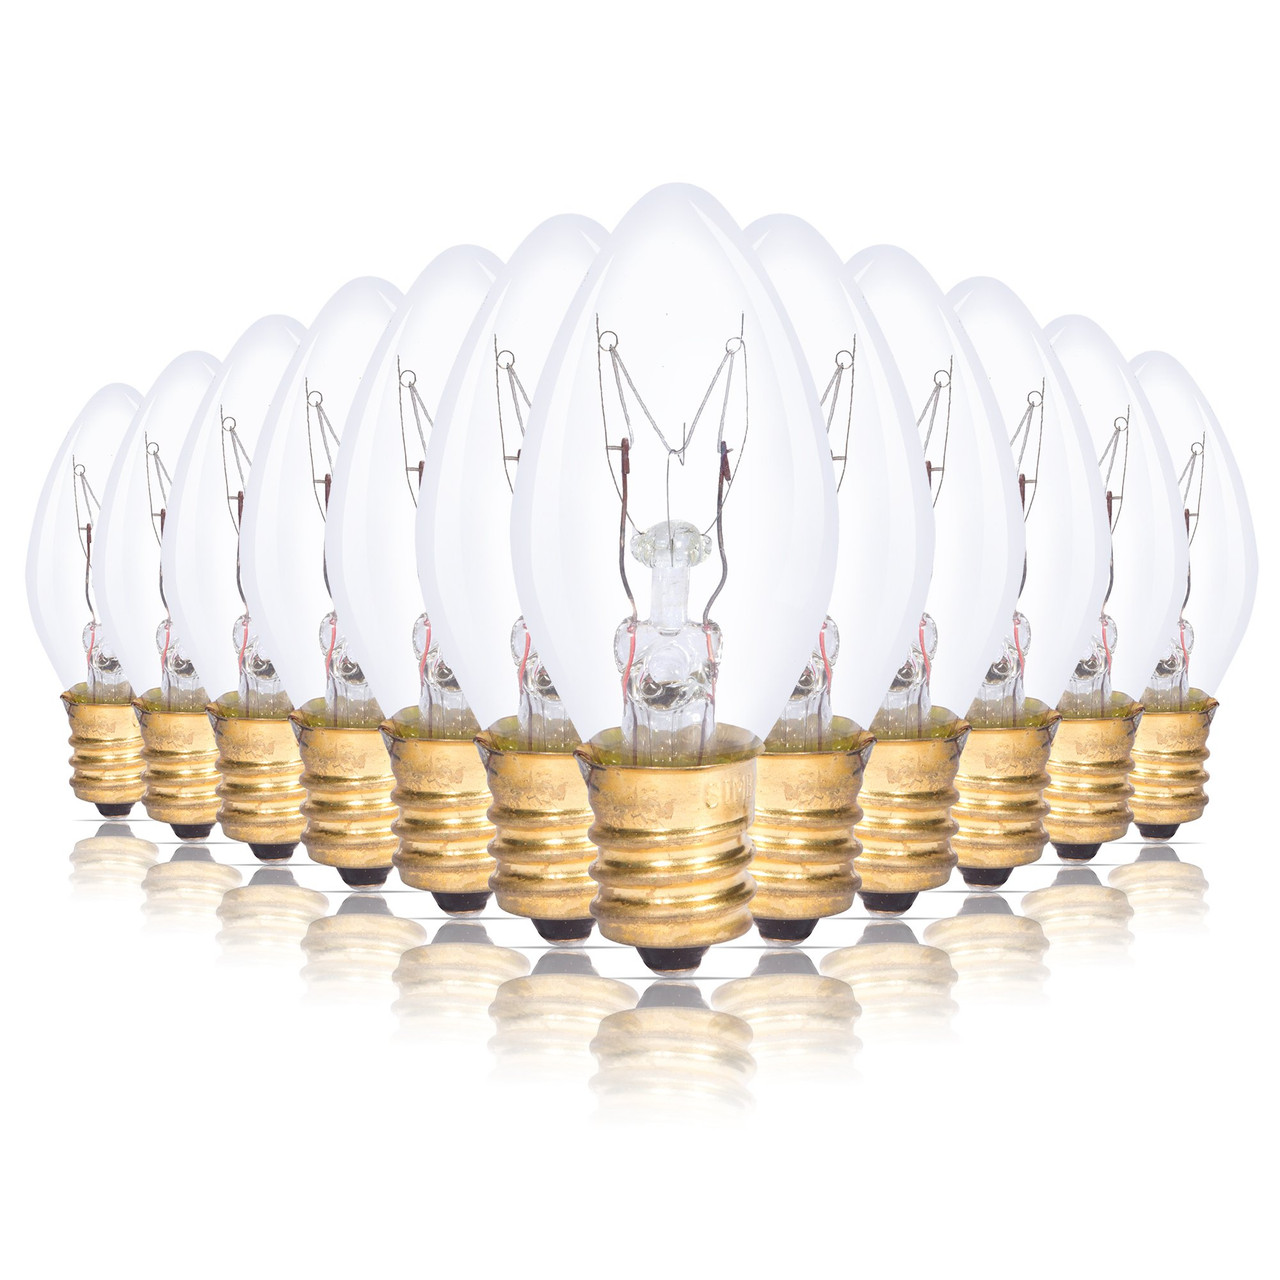 Simba Lighting® C7 15W Replacement Bulb Clear Candle Shape 120V, E12  Candelabra Base, 2700K, 12